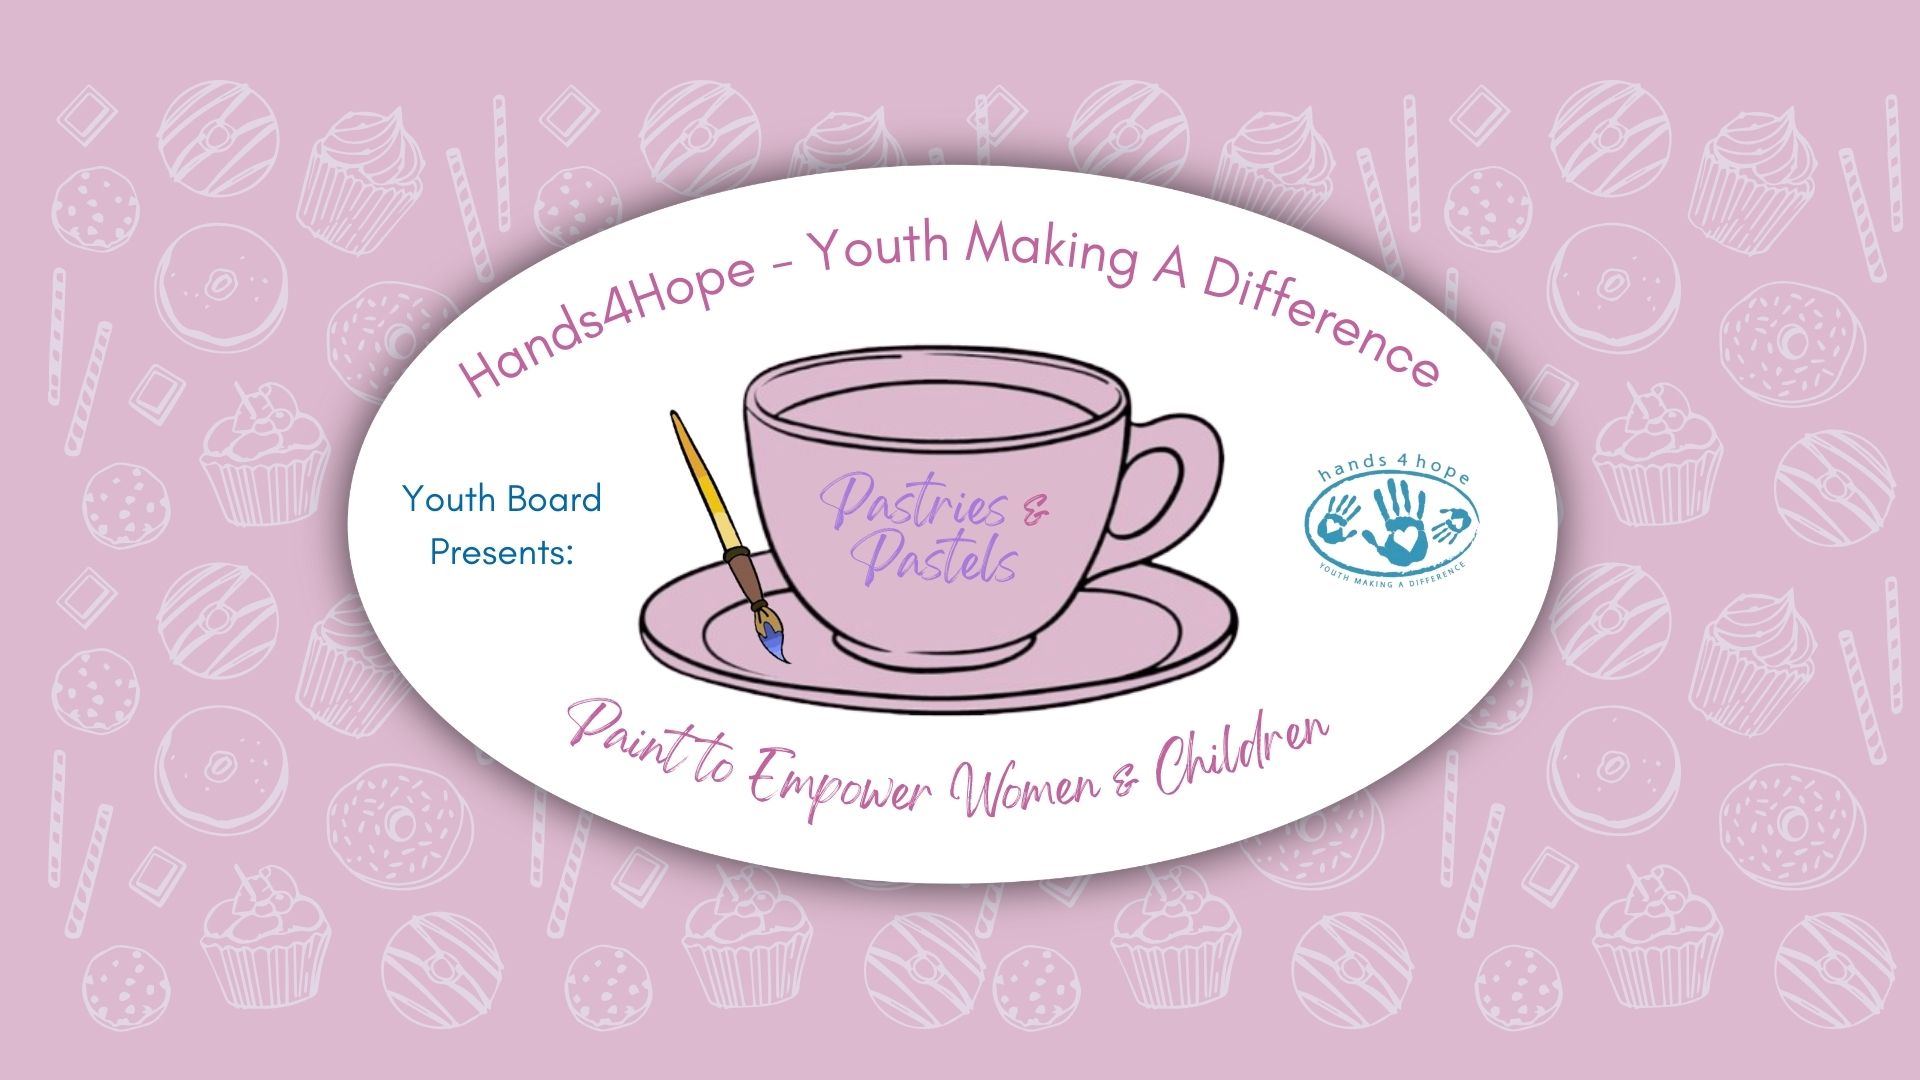 Pastries & Pastels: Paint to Empower Women and Children